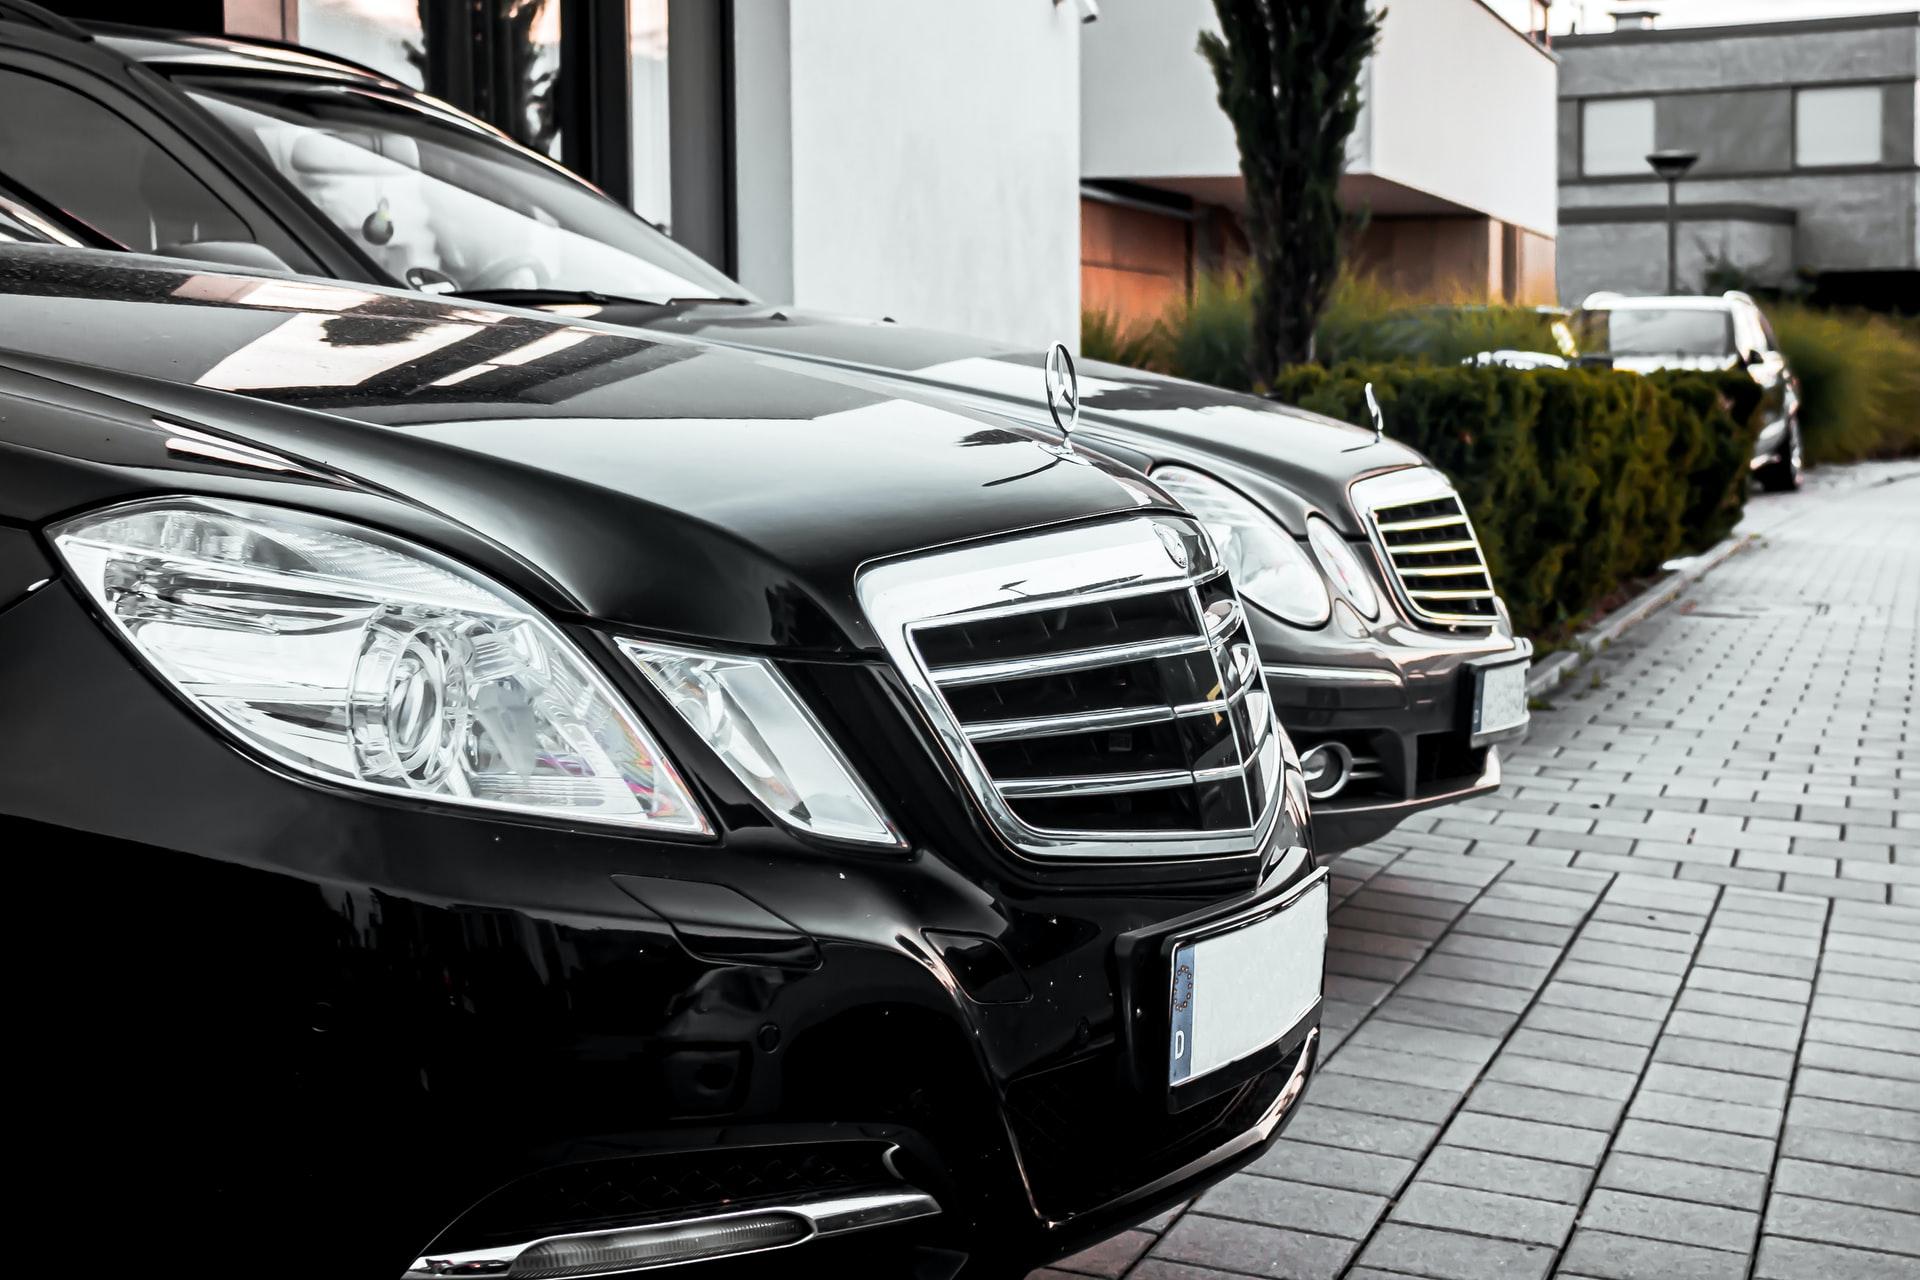 Do you know the difference between the Mercedes E Class and S Class?